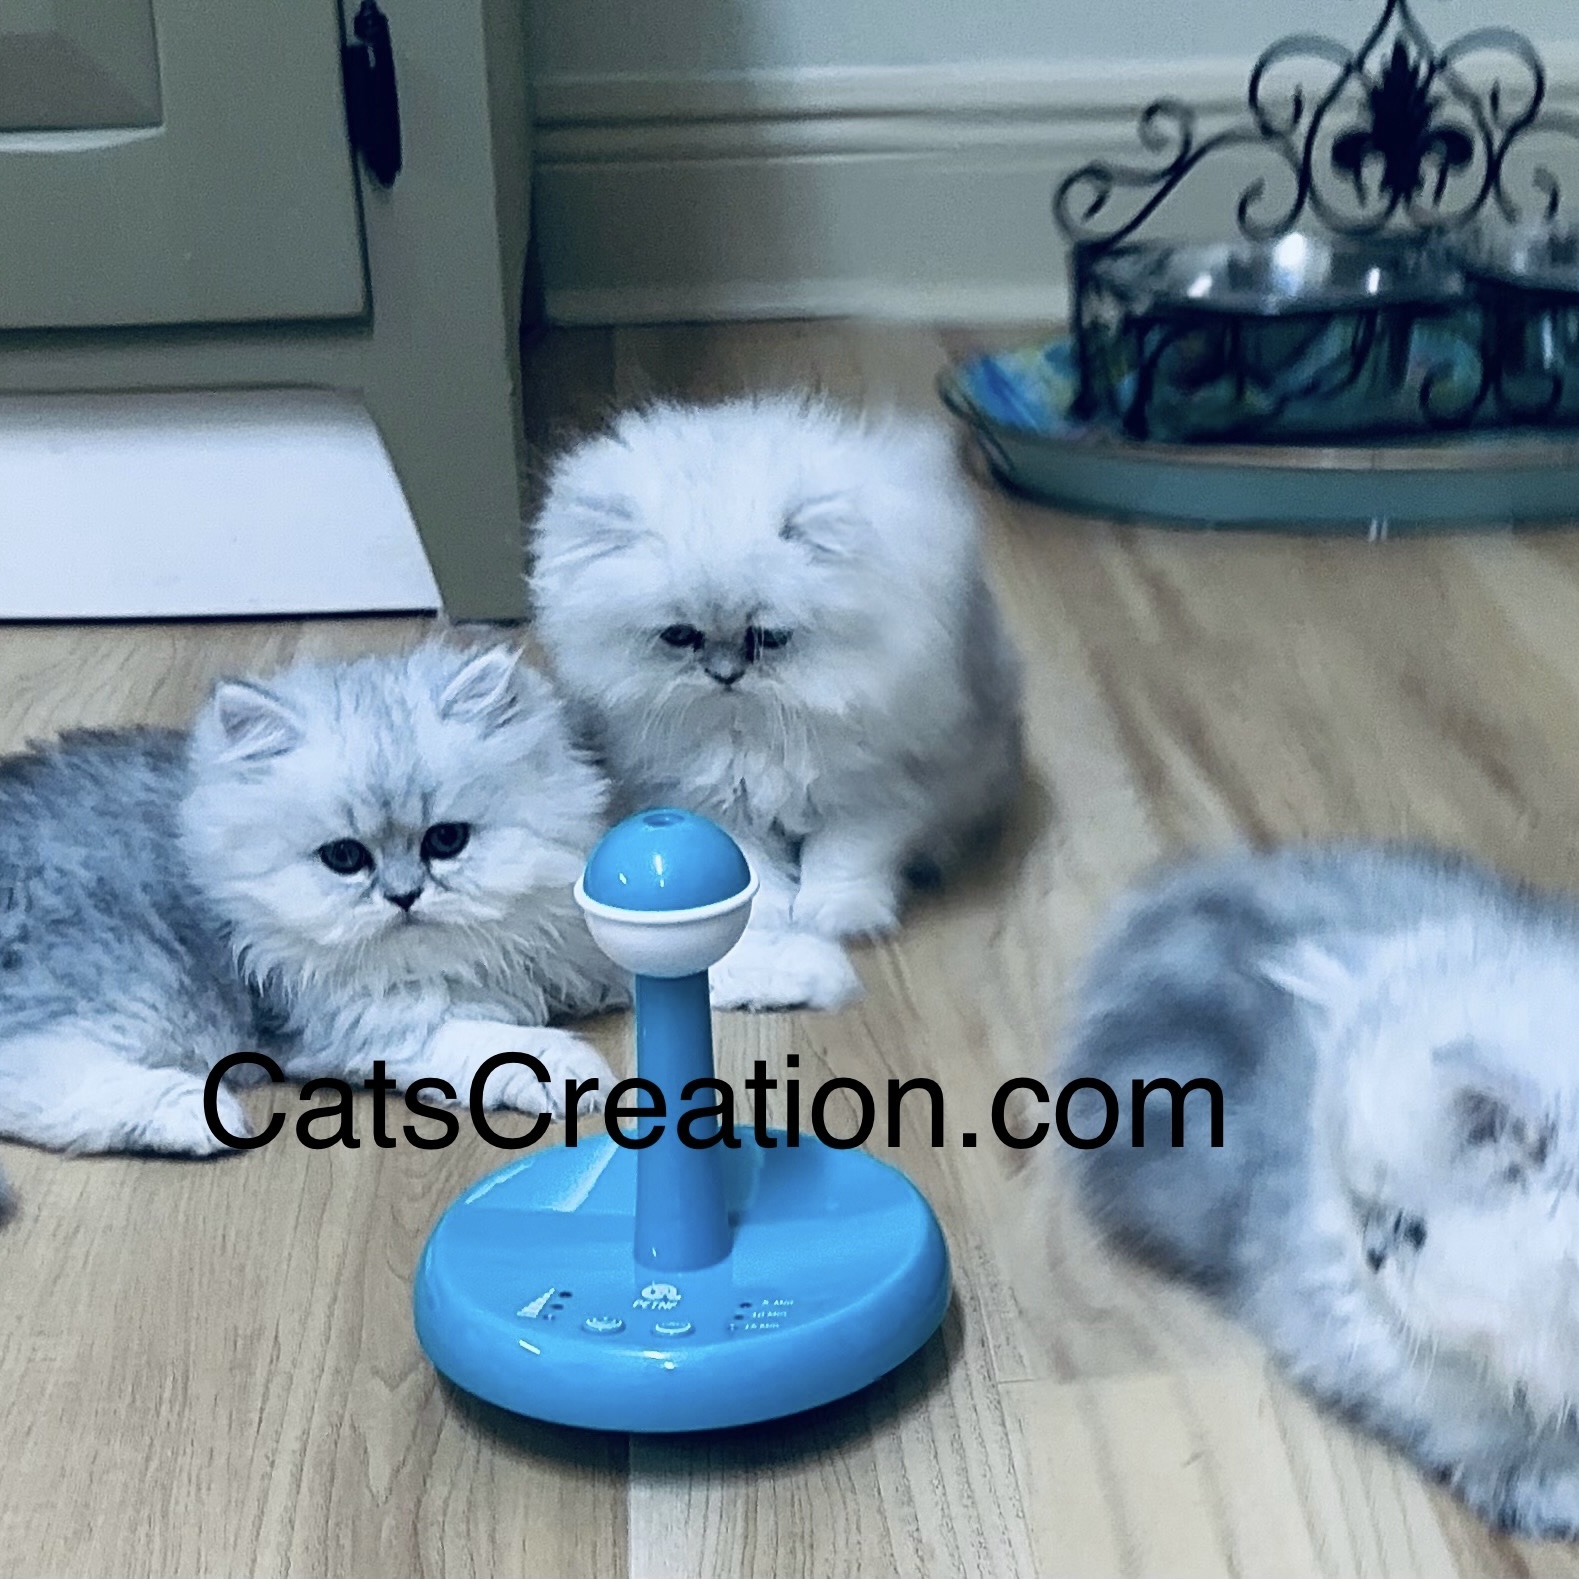 Available Teacup Persian Kittens blue with toy